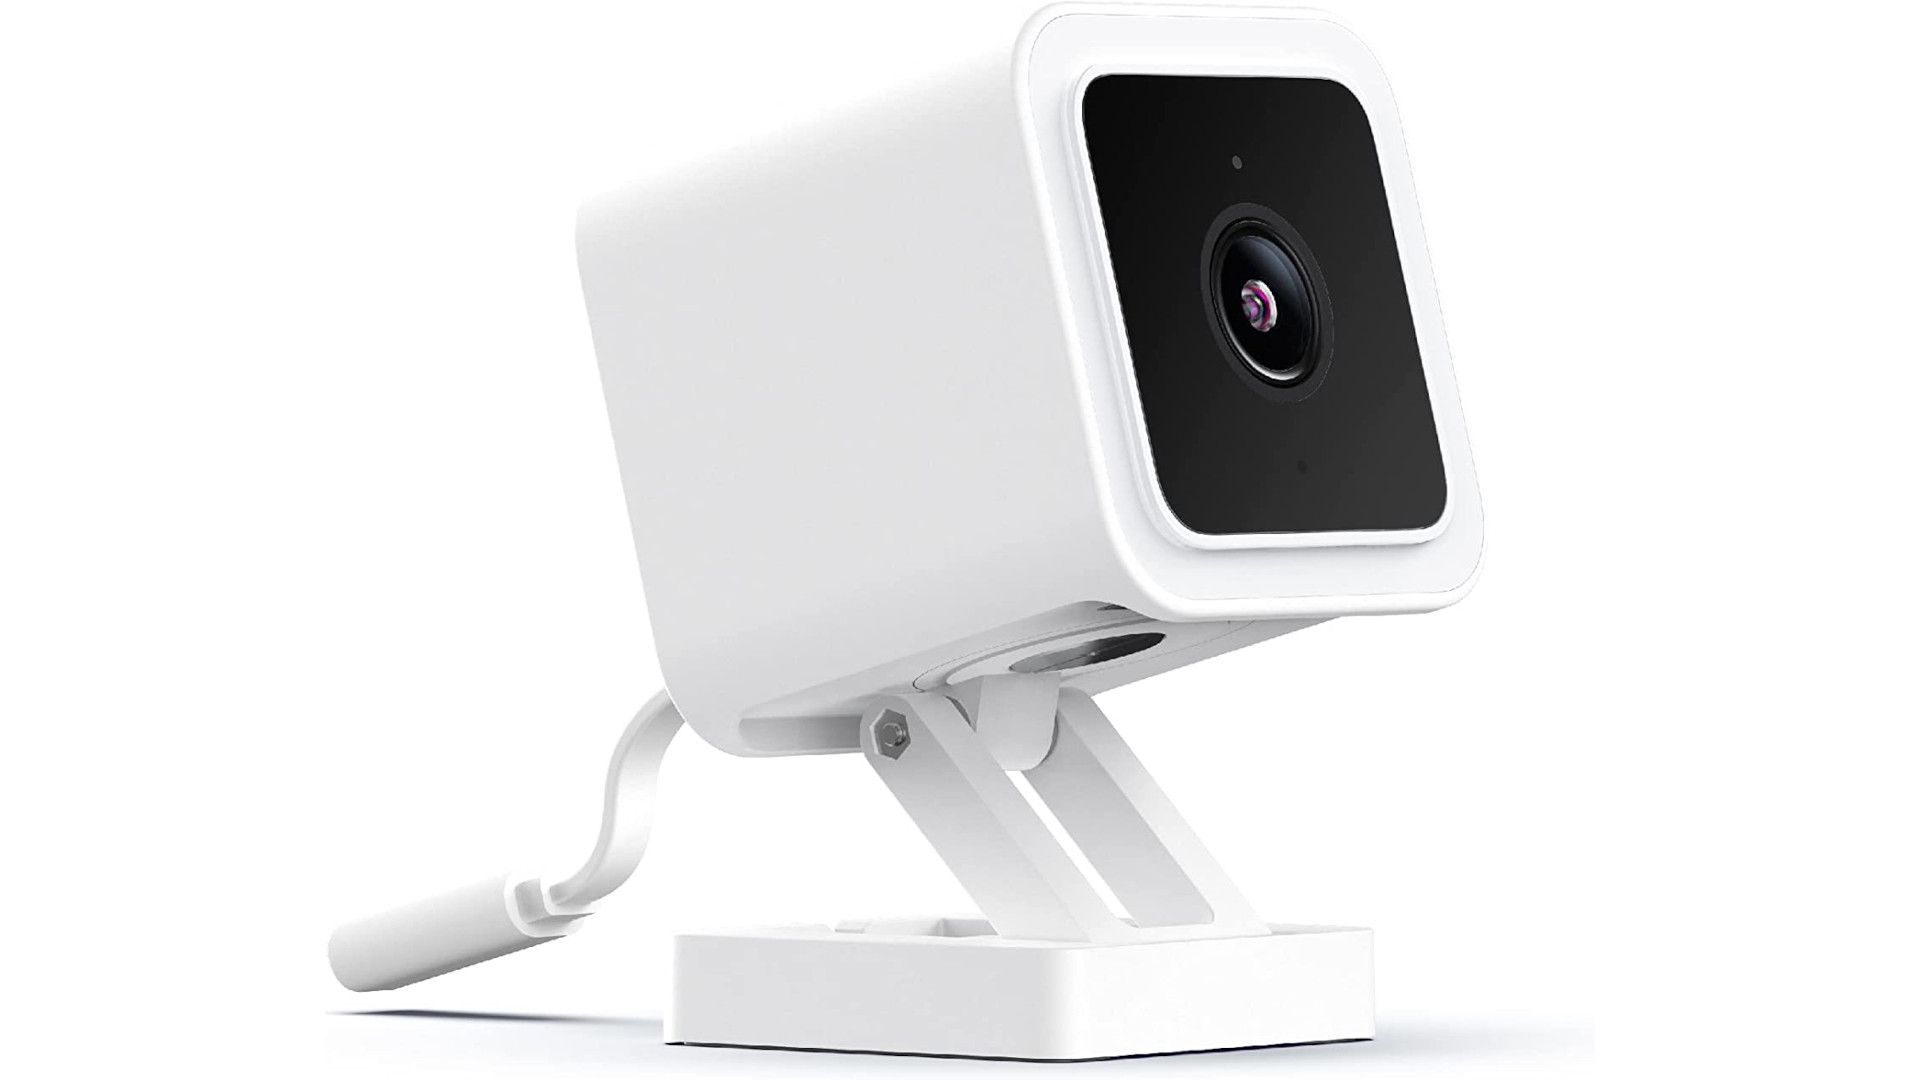 A Wyze Cam is shown on a white background.